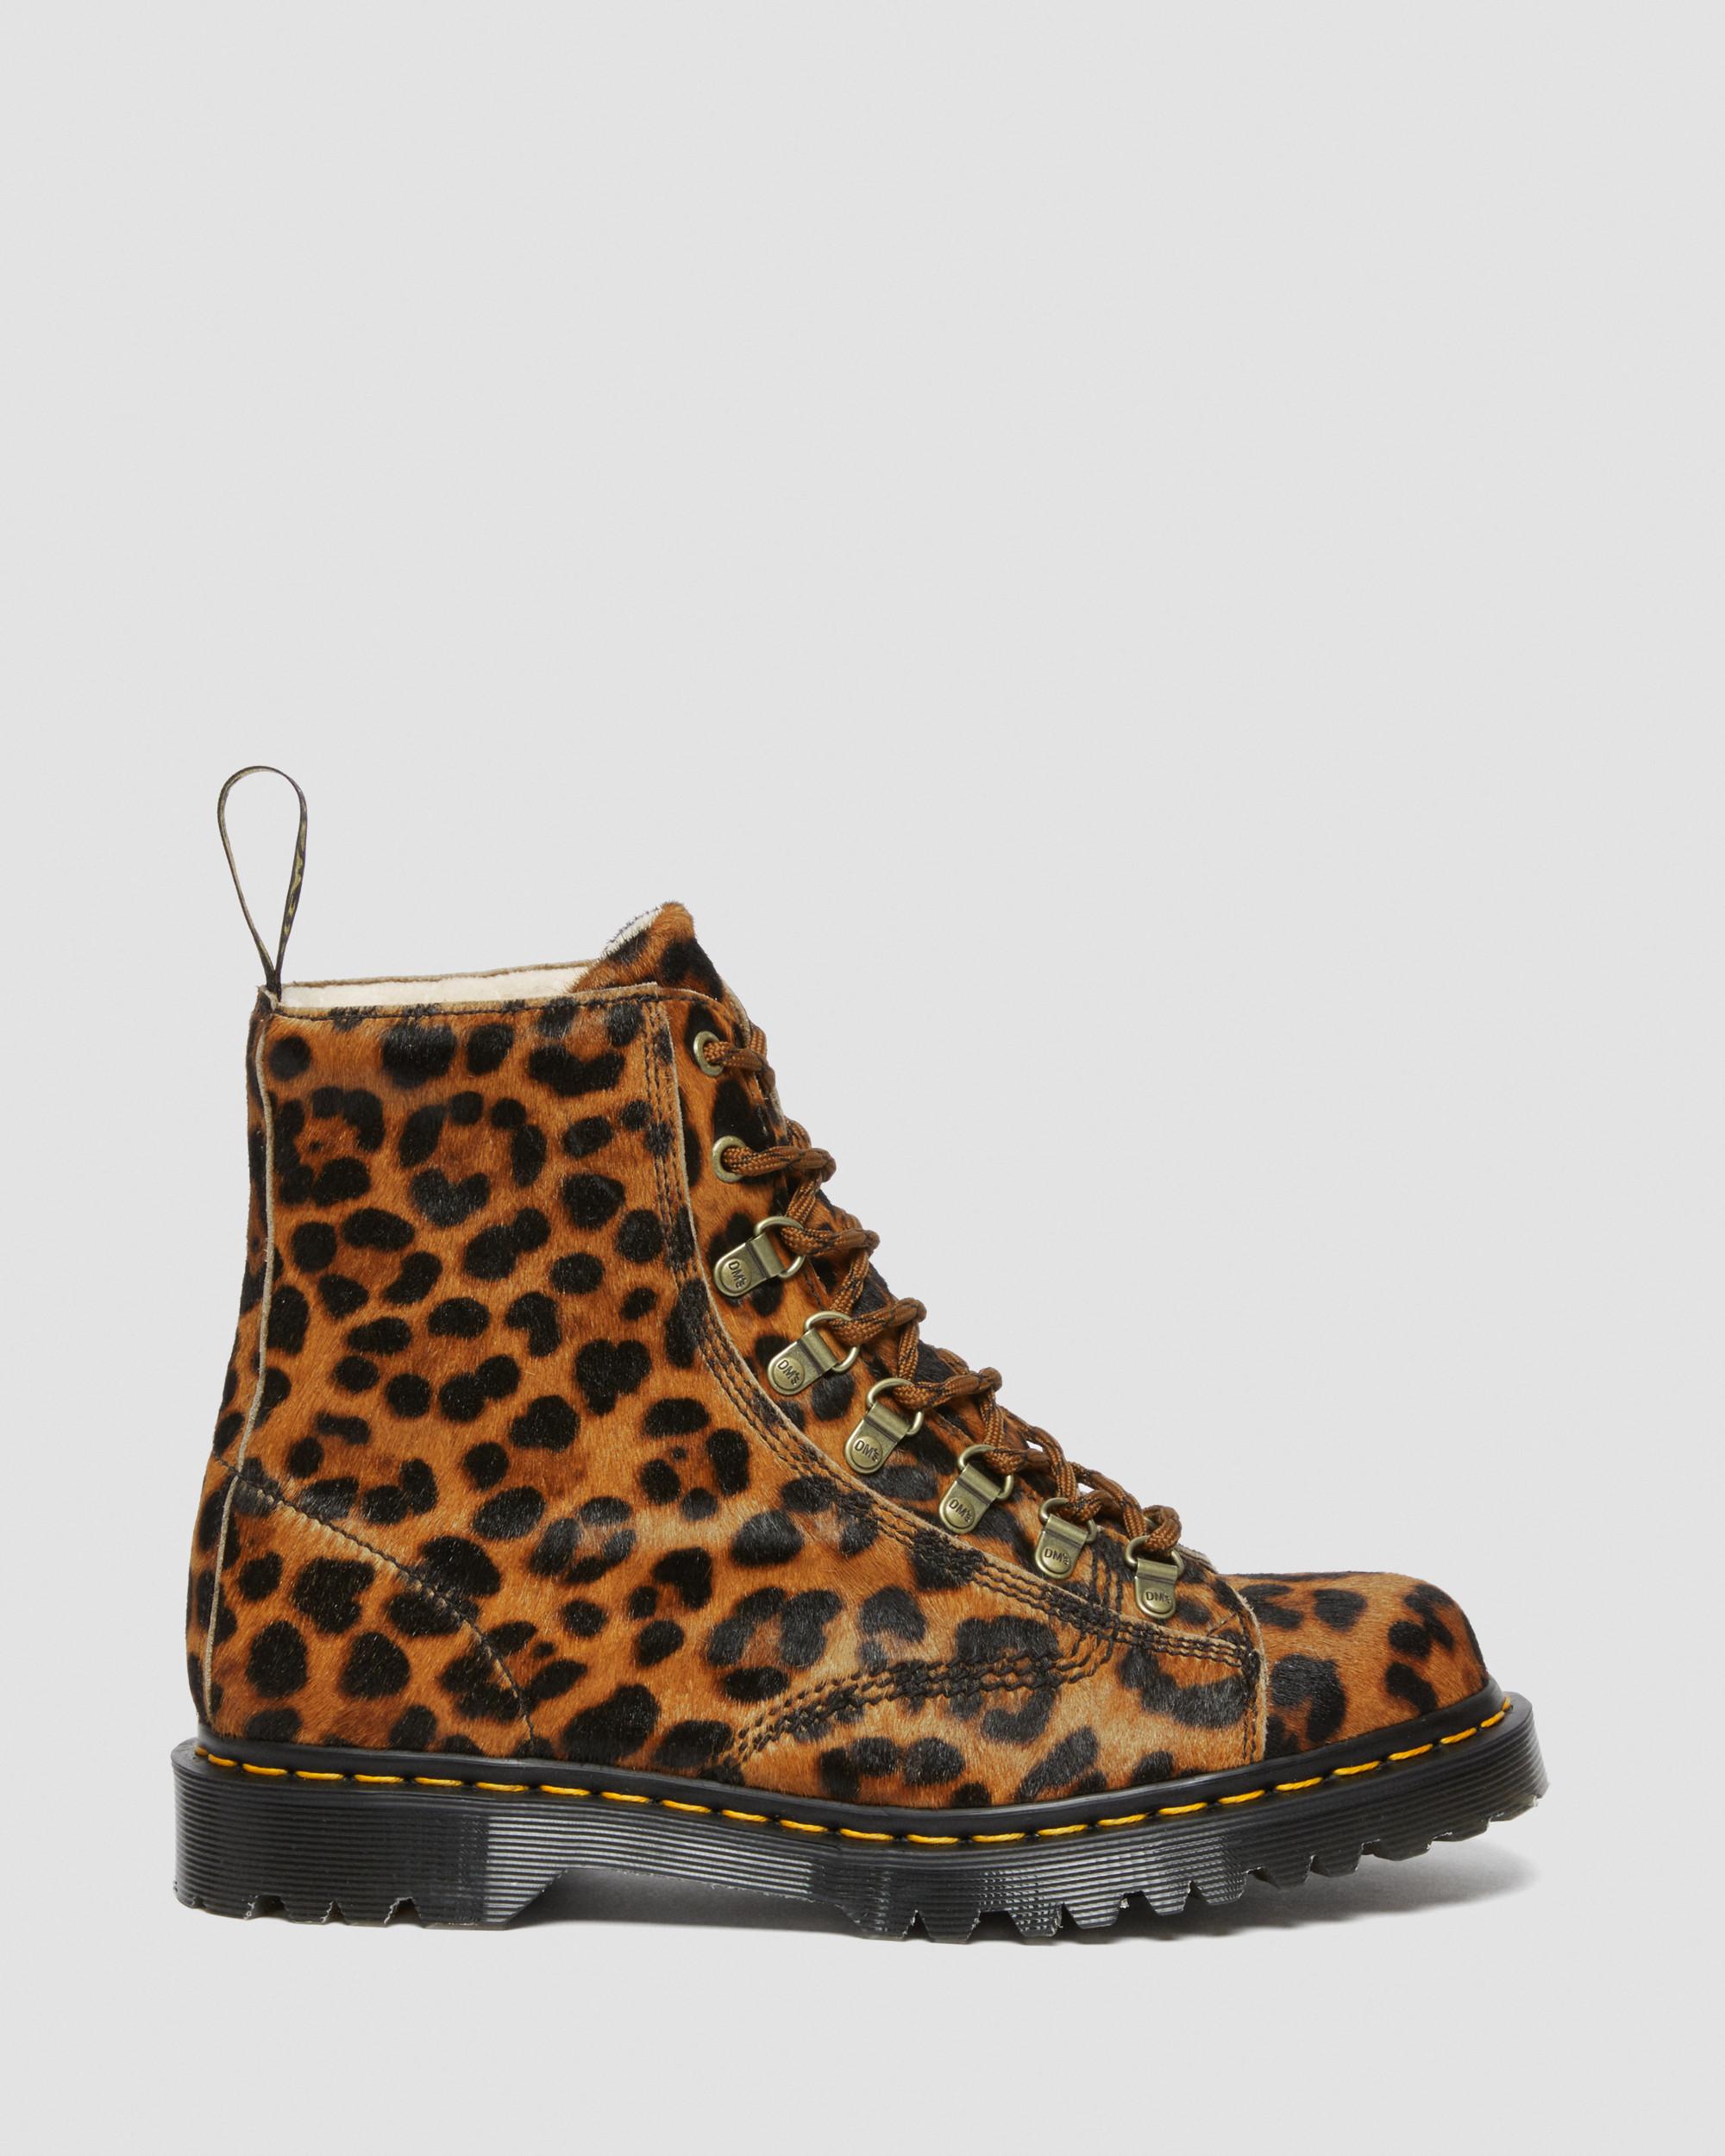 Berri pk Voel me slecht Barton Made in England Leopard Hair On Boots | Dr. Martens